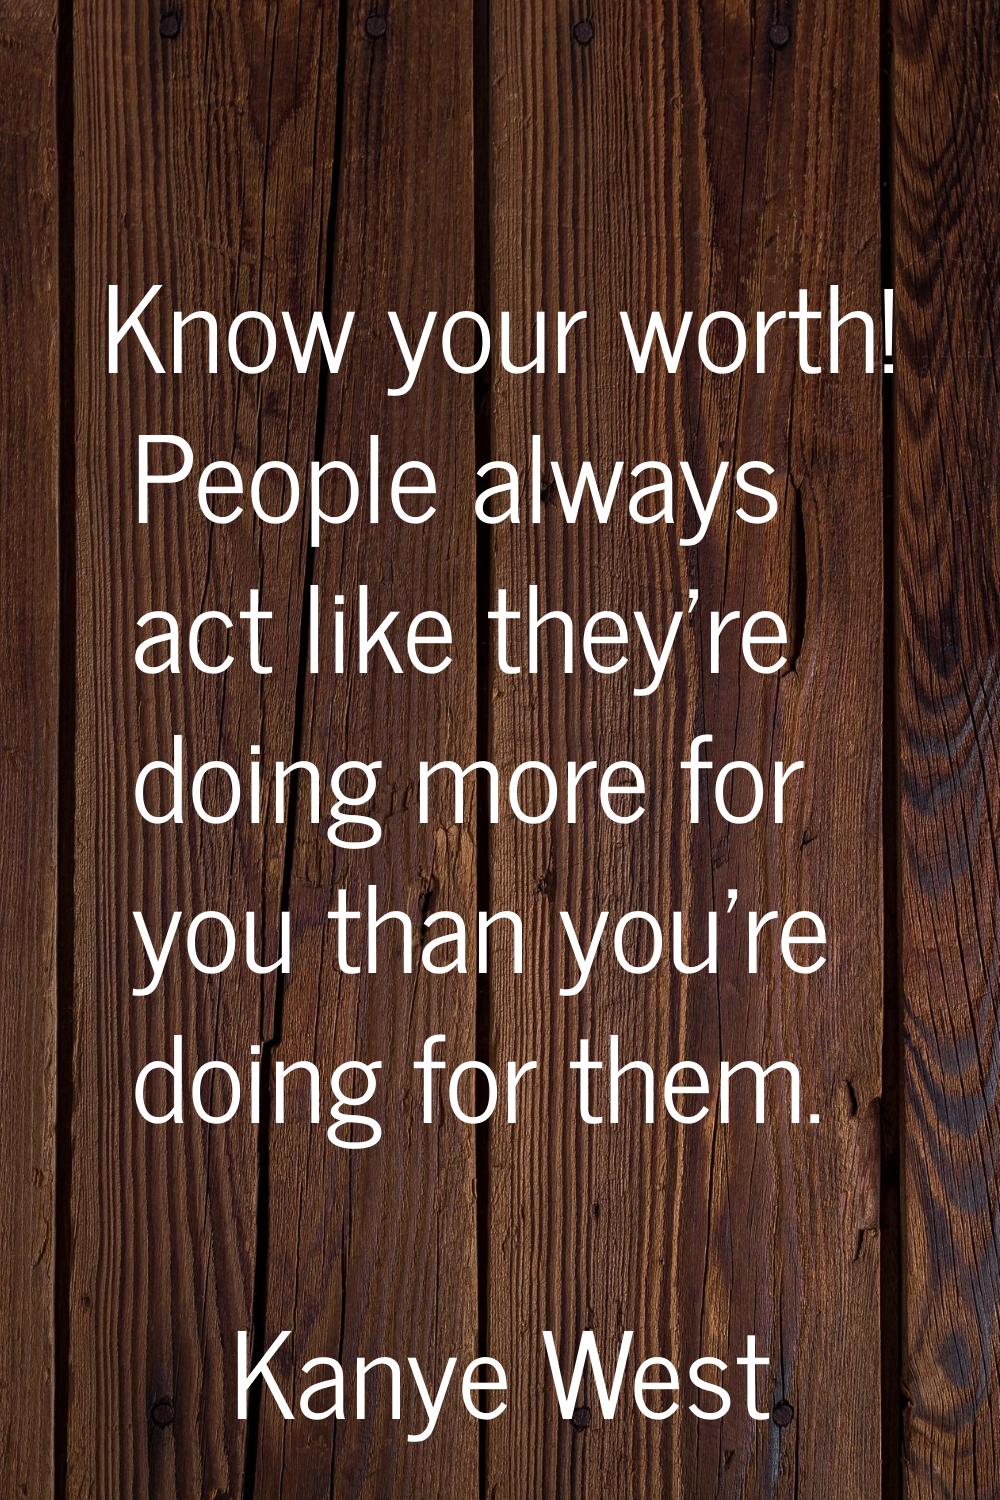 Know your worth! People always act like they're doing more for you than you're doing for them.